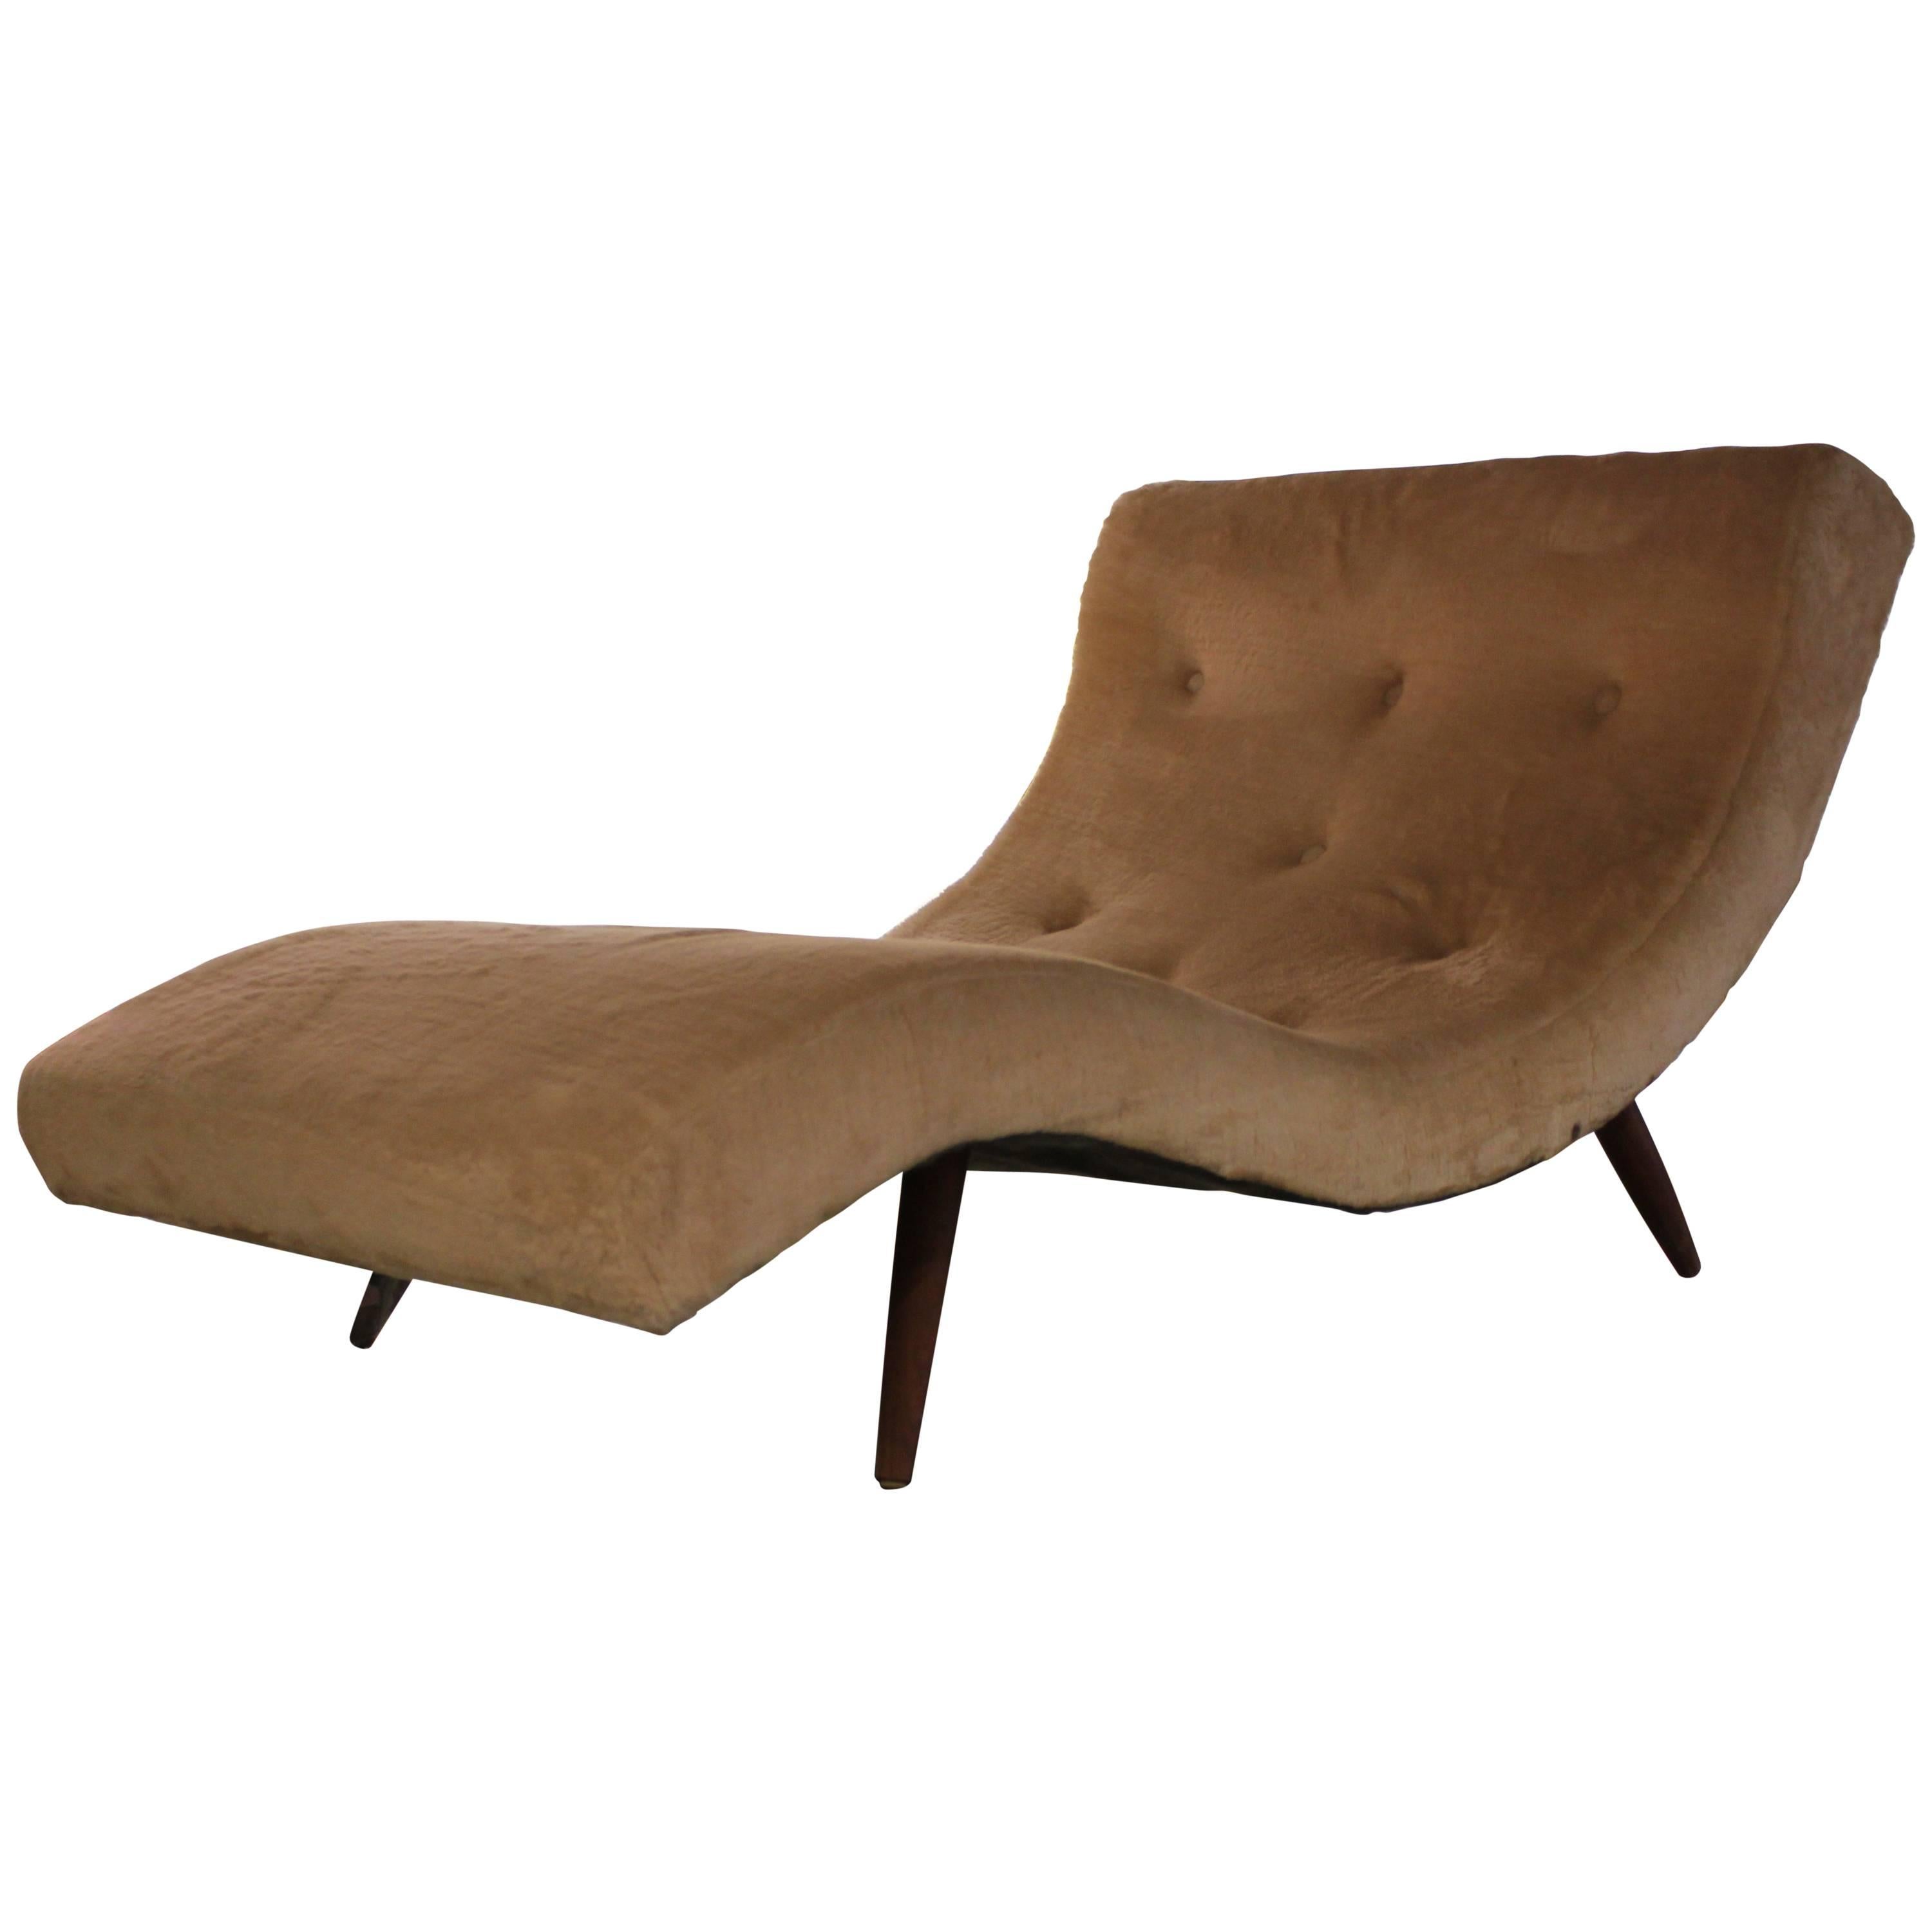 Modern Adrian Pearsall for Craft Associates Two Person Wave Chaise Lounge